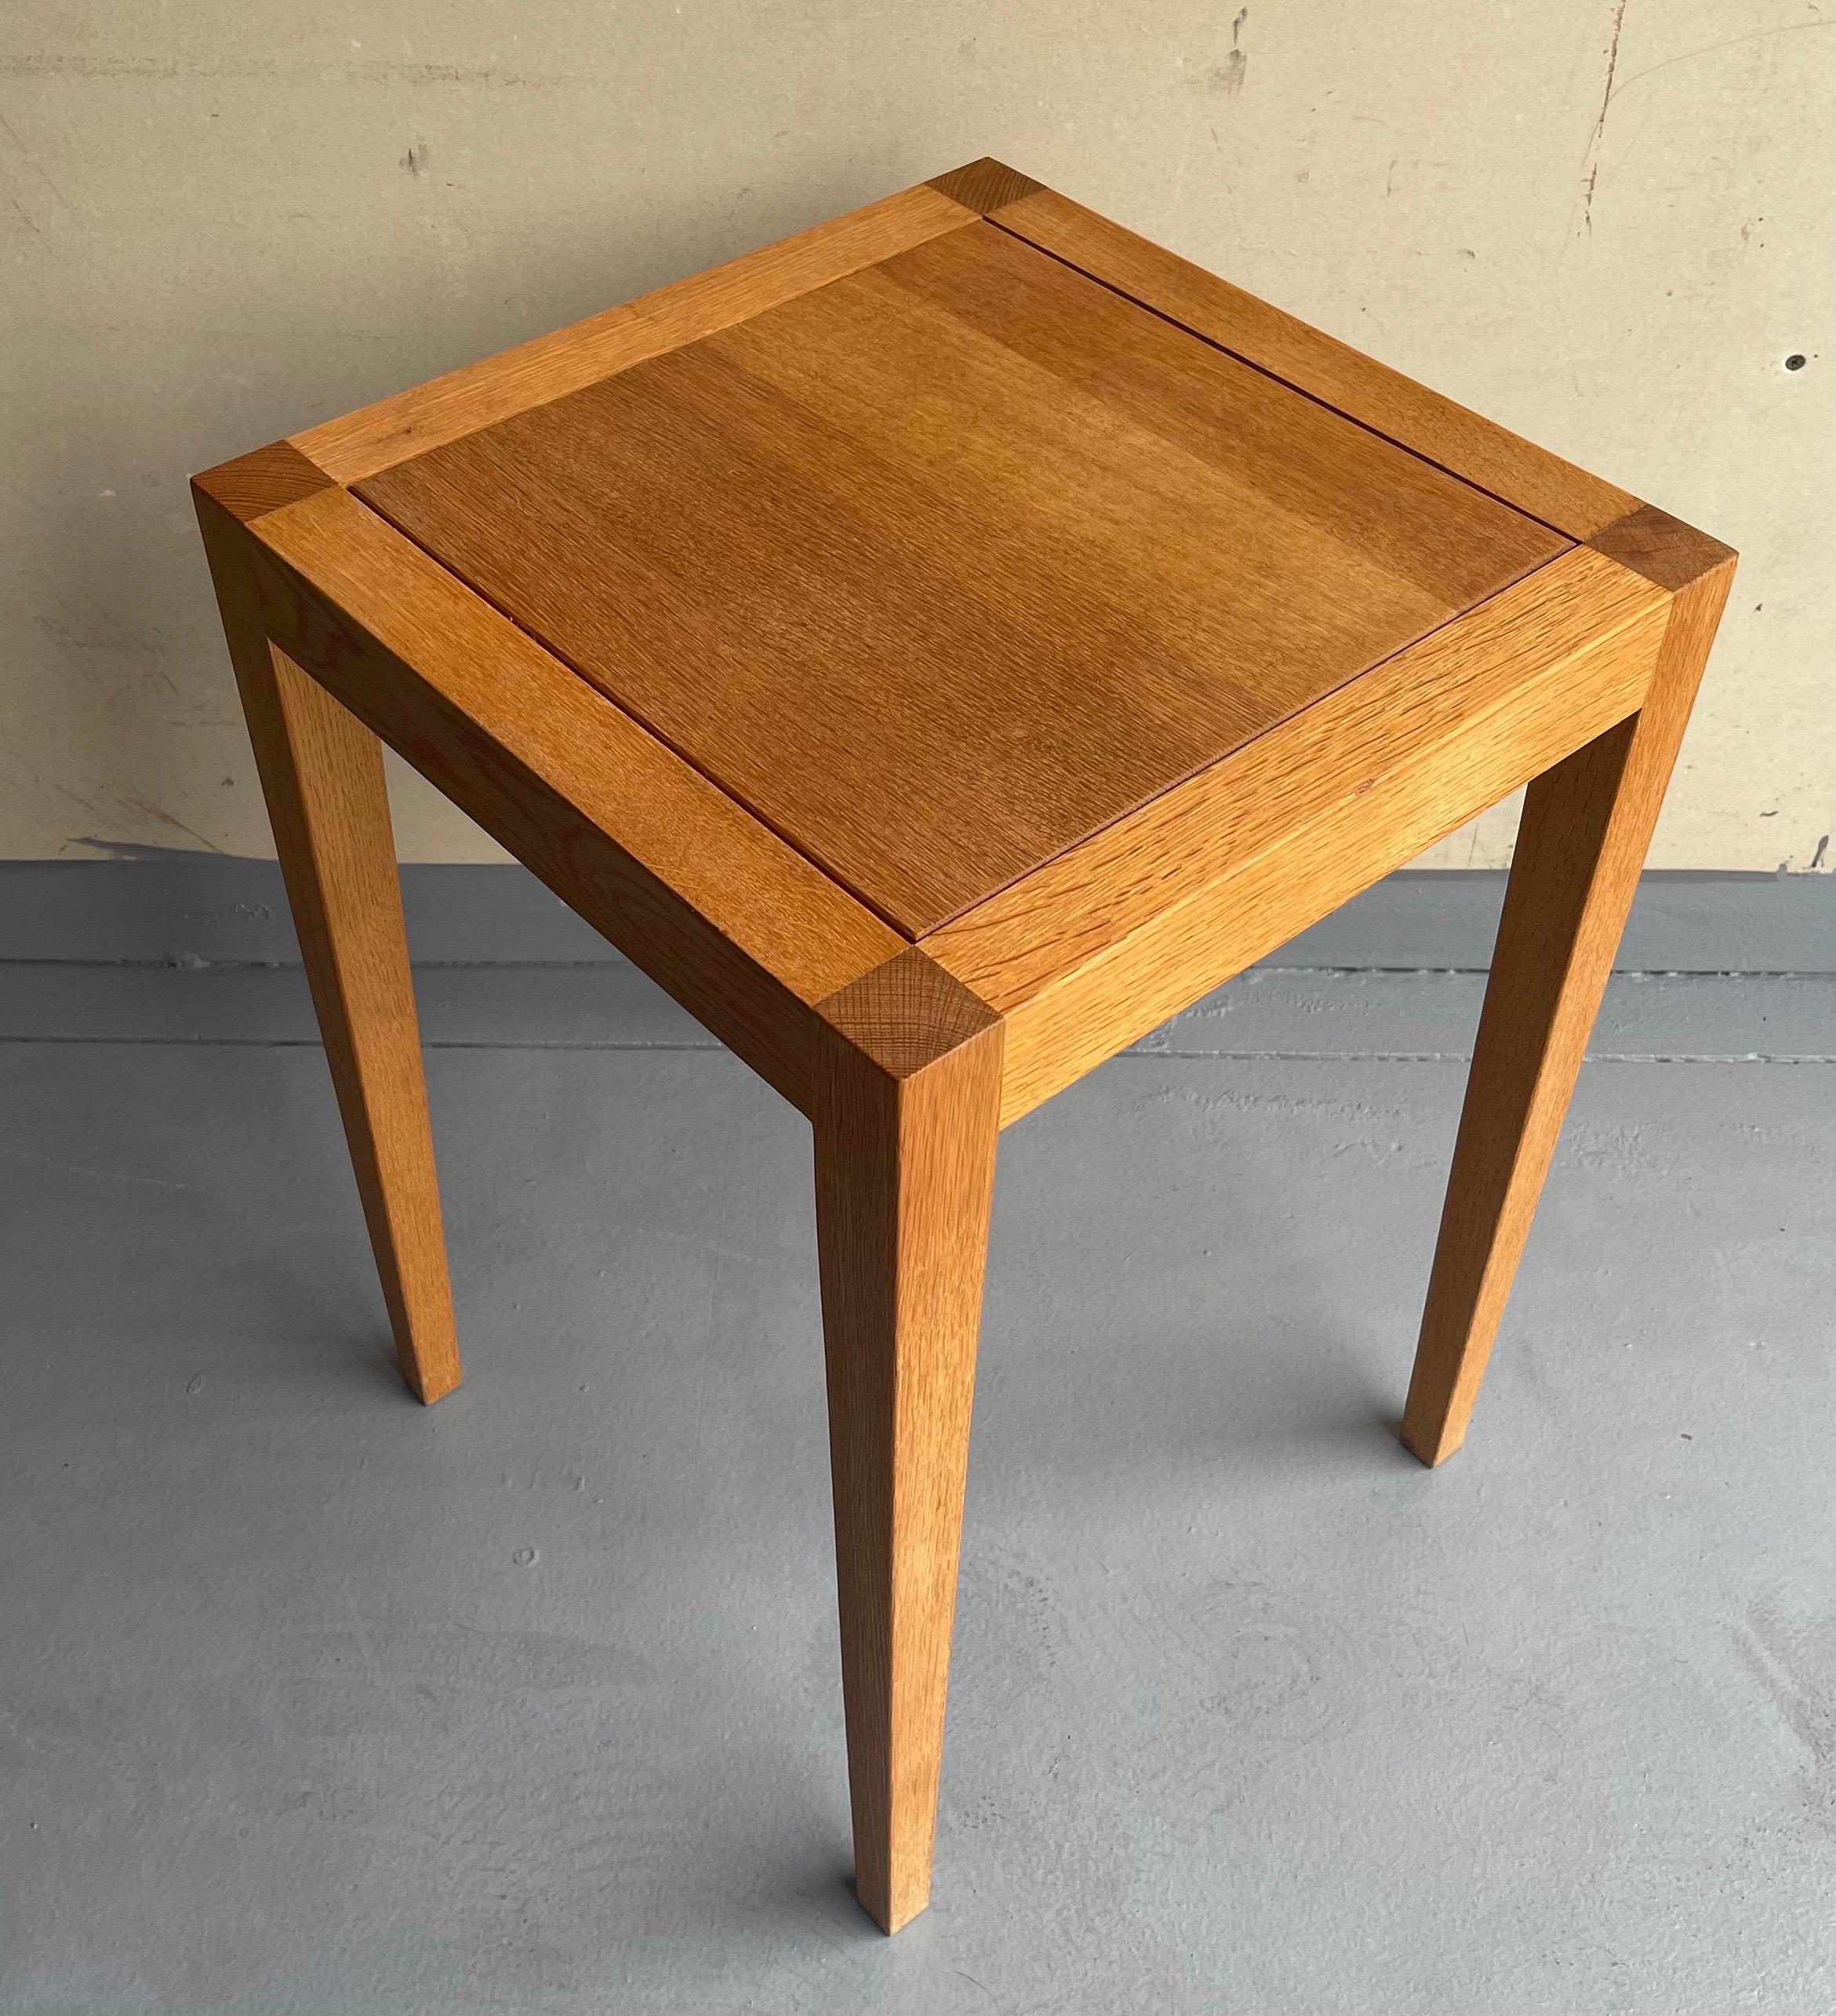 Pair of Organic Modern Square Nesting Tables by Gunther Lambert For Sale 2